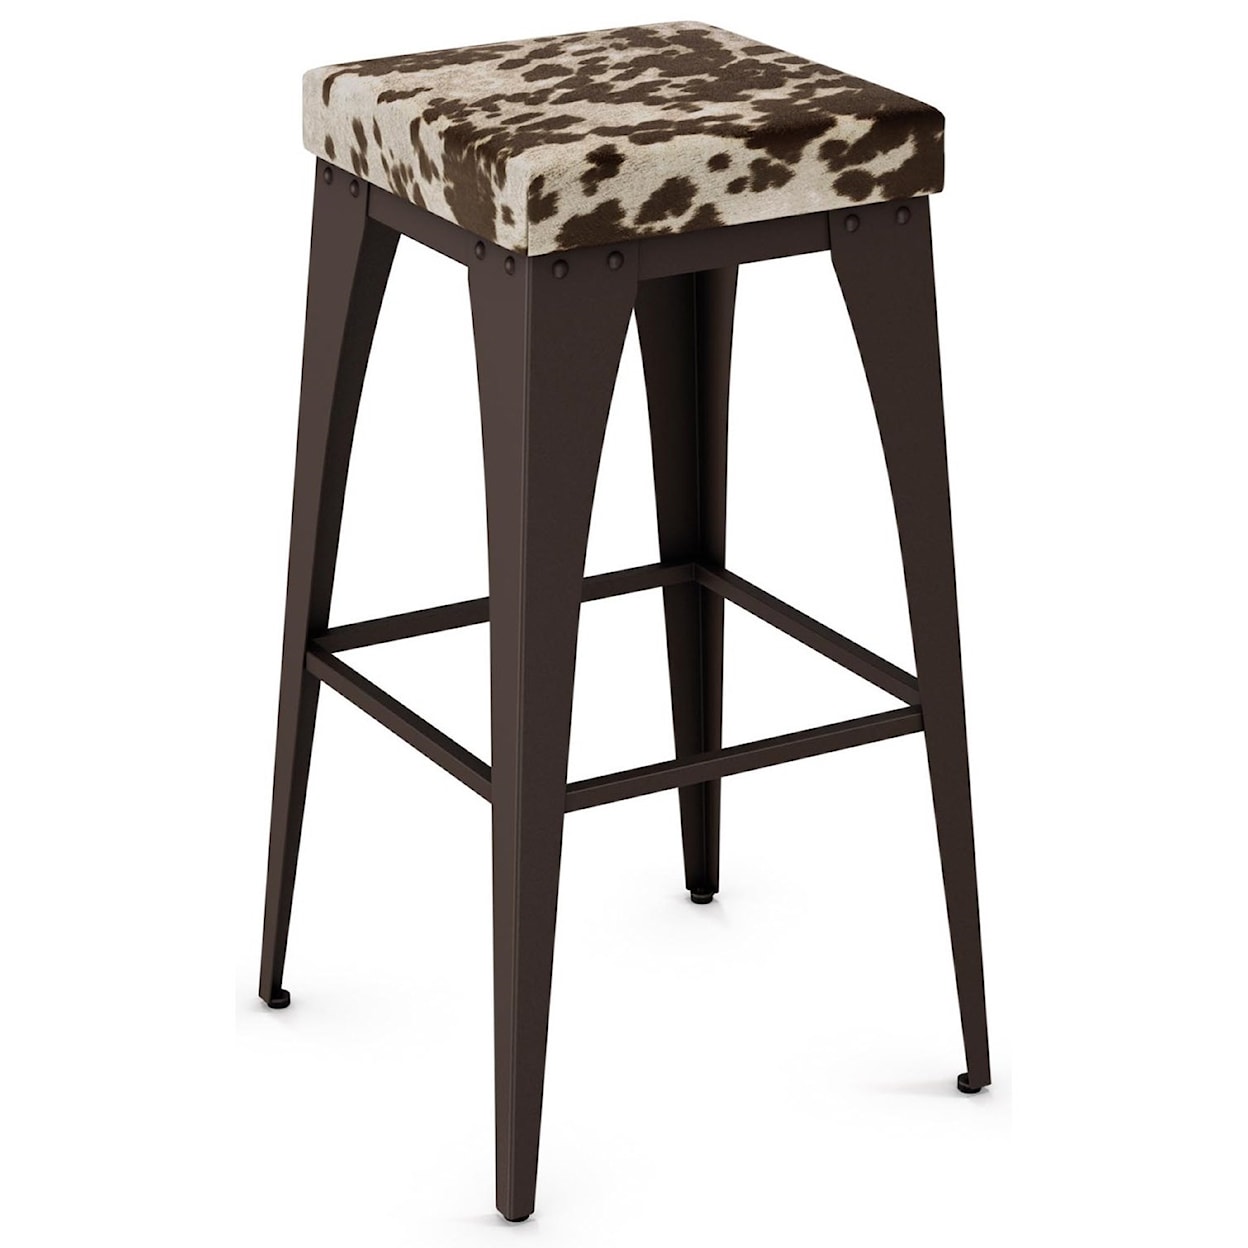 Amisco Industrial 26" Upright Stool with Upholstered Seat